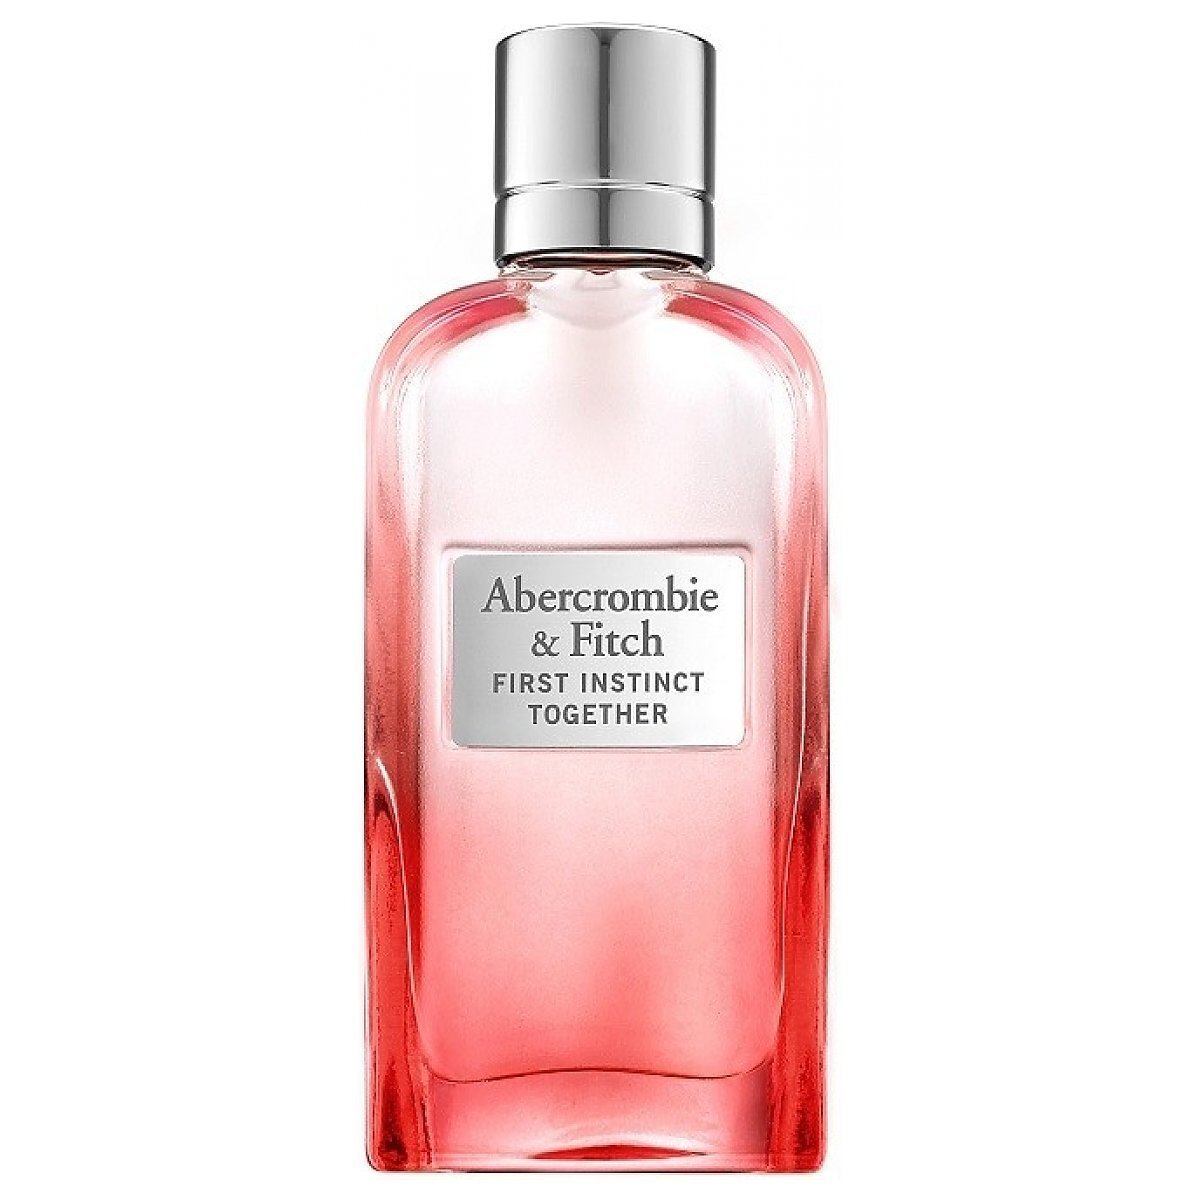 abercrombie & fitch first instinct together woman